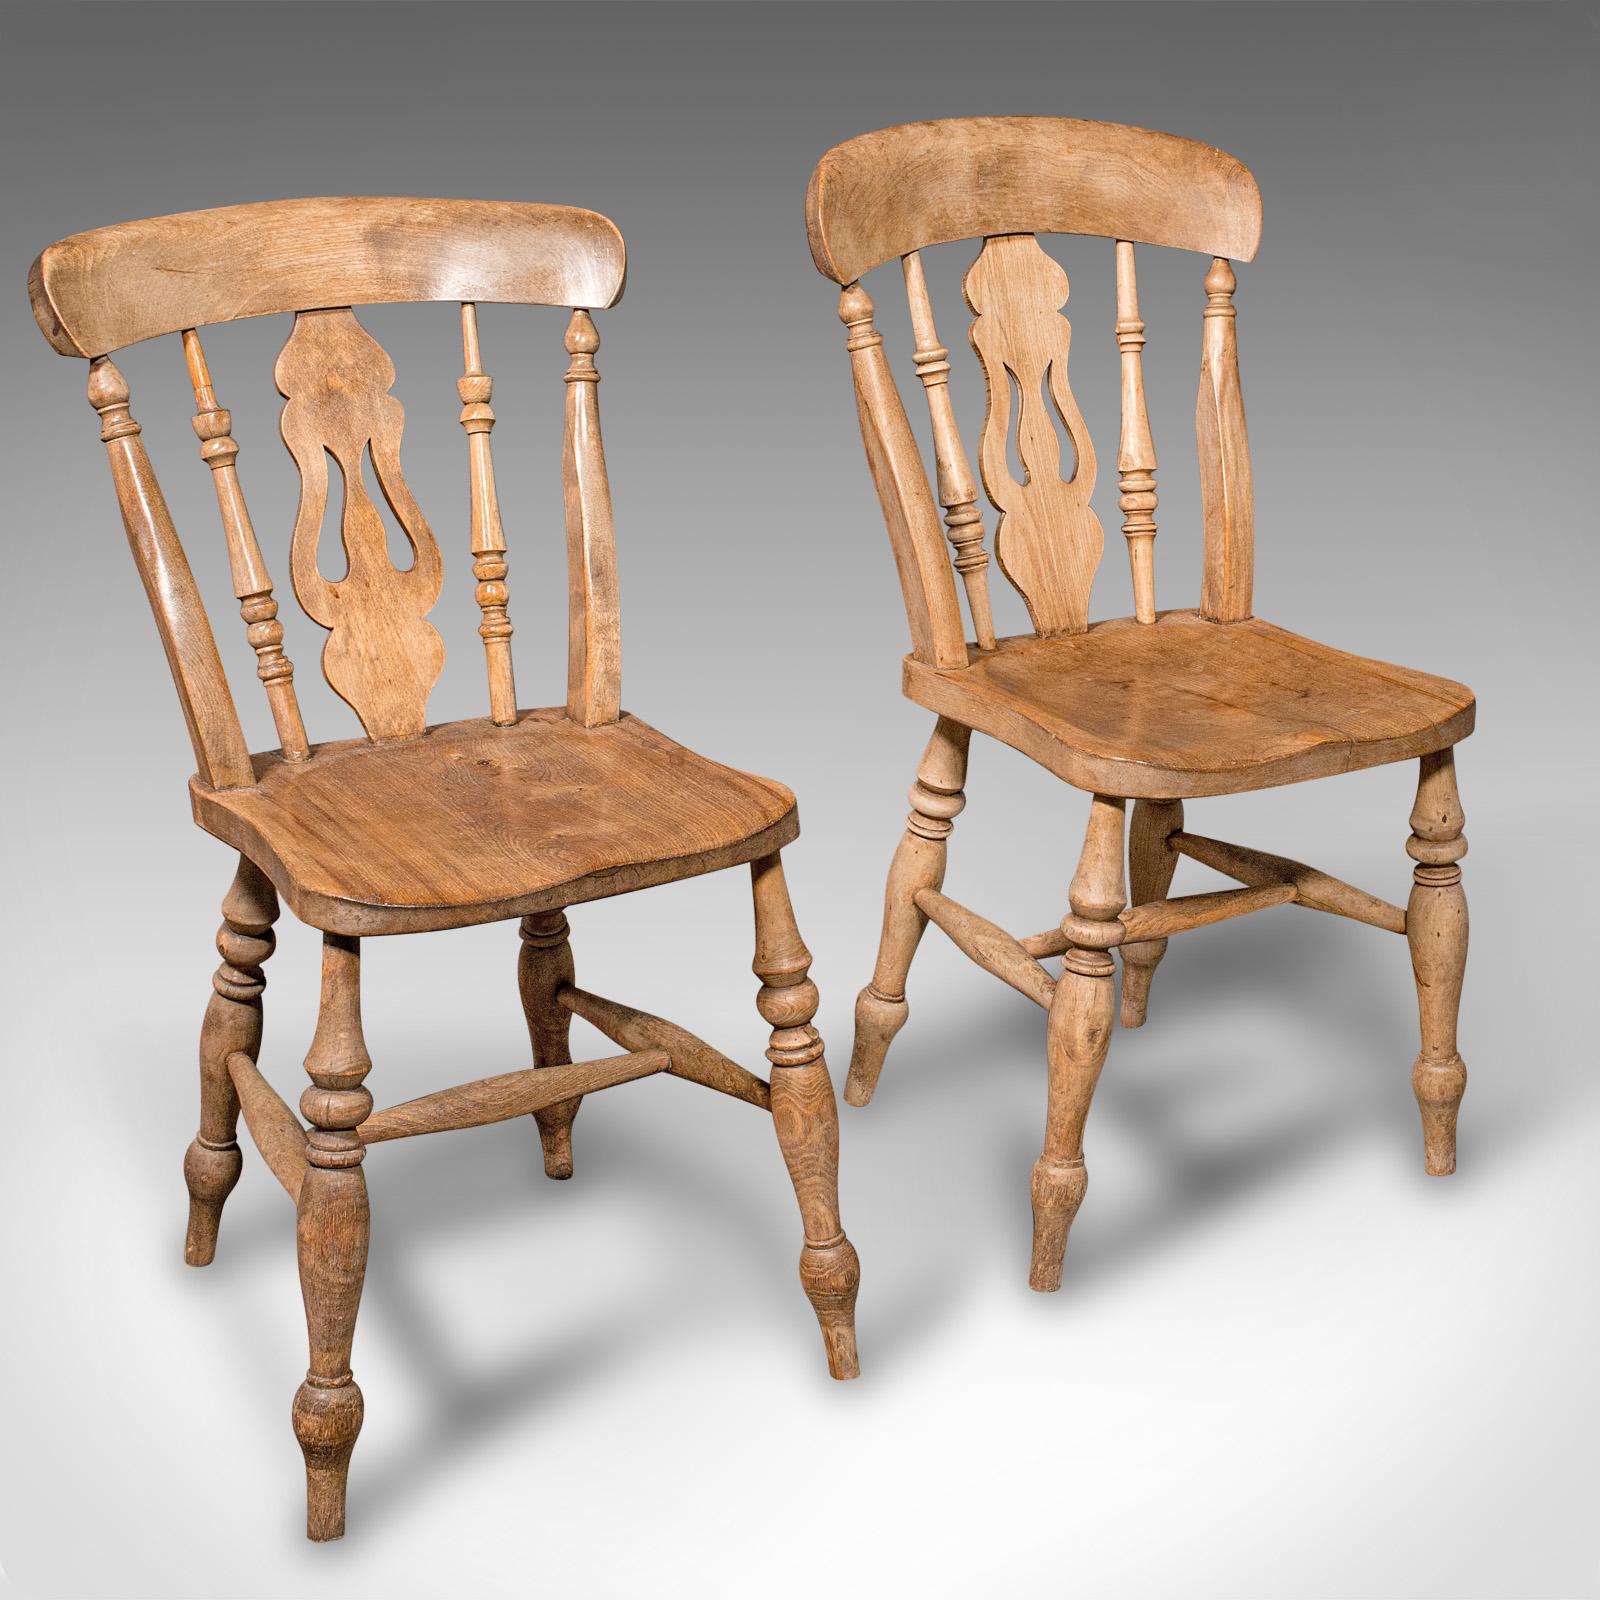 British Set Of 4 Antique Dining Chairs, English Elm, Beech, Kitchen, Reception Hall Seat For Sale